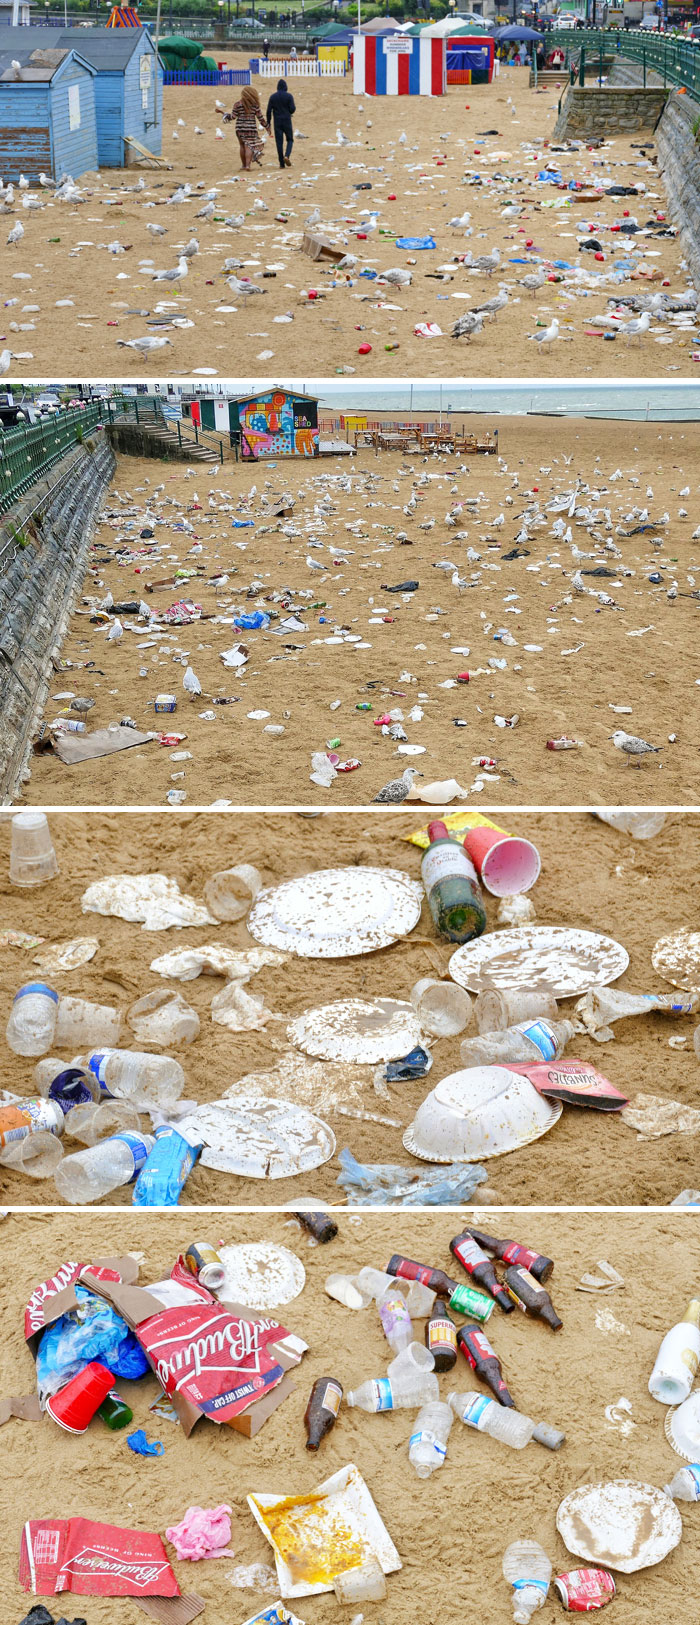 Went To The Beach At Margate And Wish I Hadn't. Is It Because The Council Is Not Putting Bins On The Beach, Or Is It The Visitors' Fault? Either Way, It's A Shame